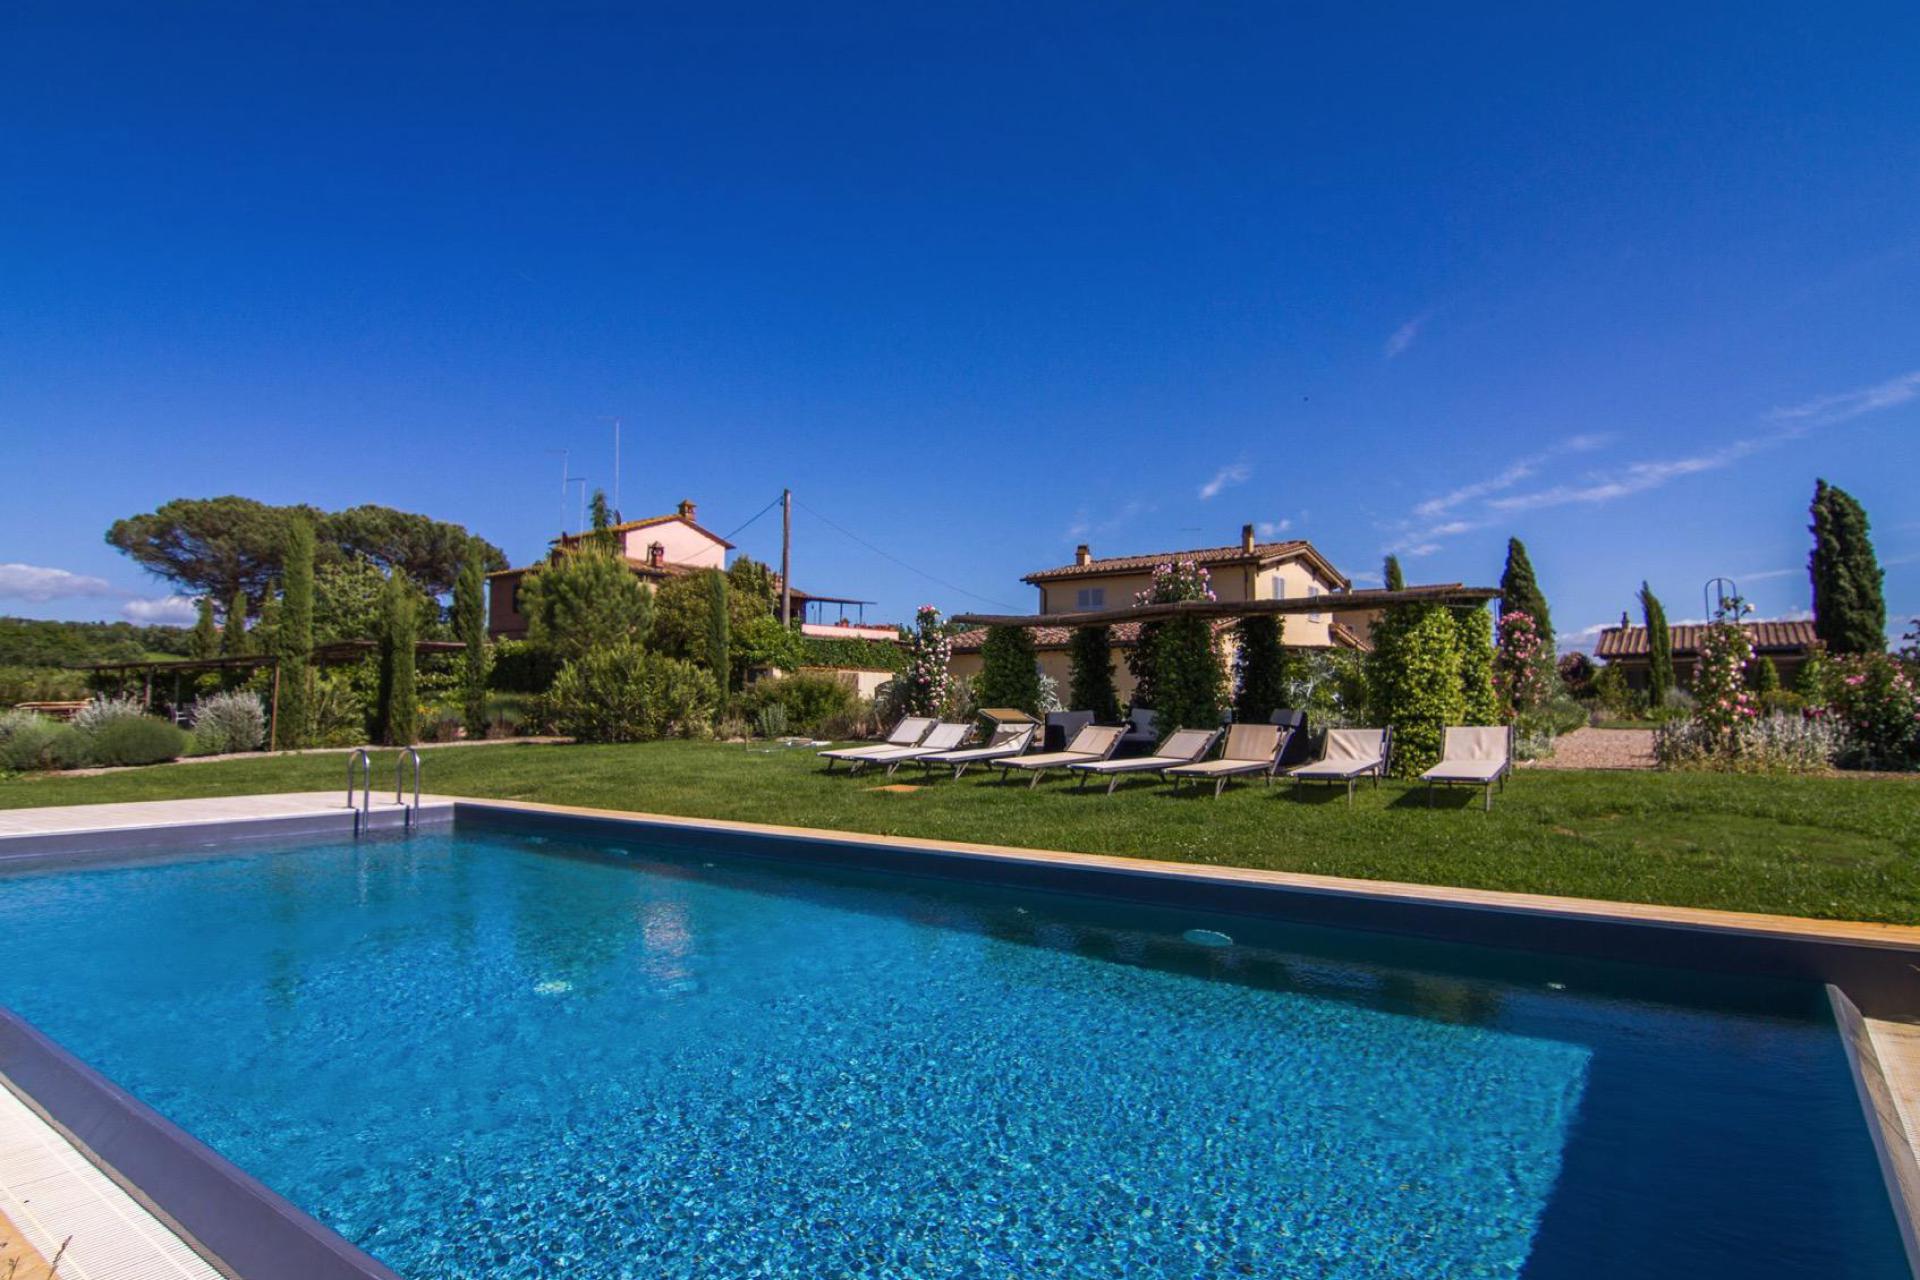 Agriturismo Siena, luxury apartments and swimming pool